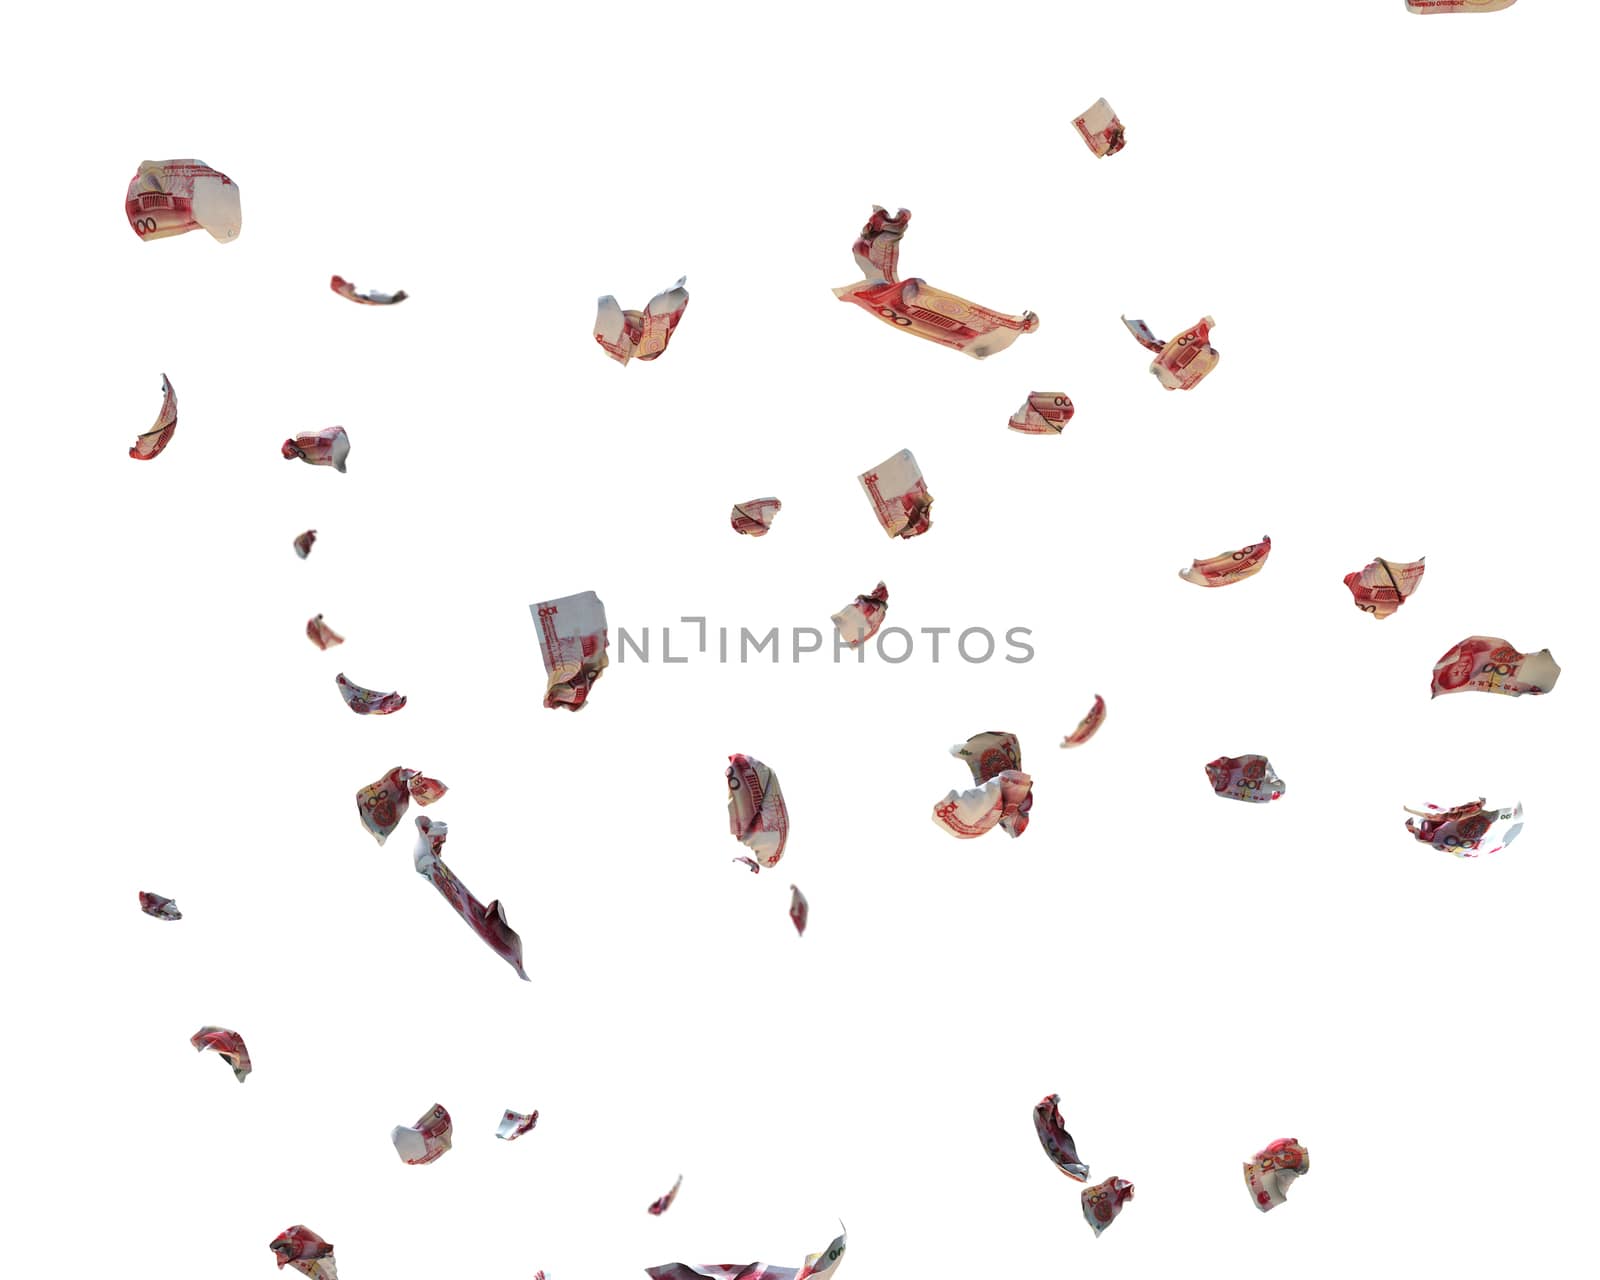 100 Chinese Yuan Currency Crumpled Banknotes flying, against white, clipping path included